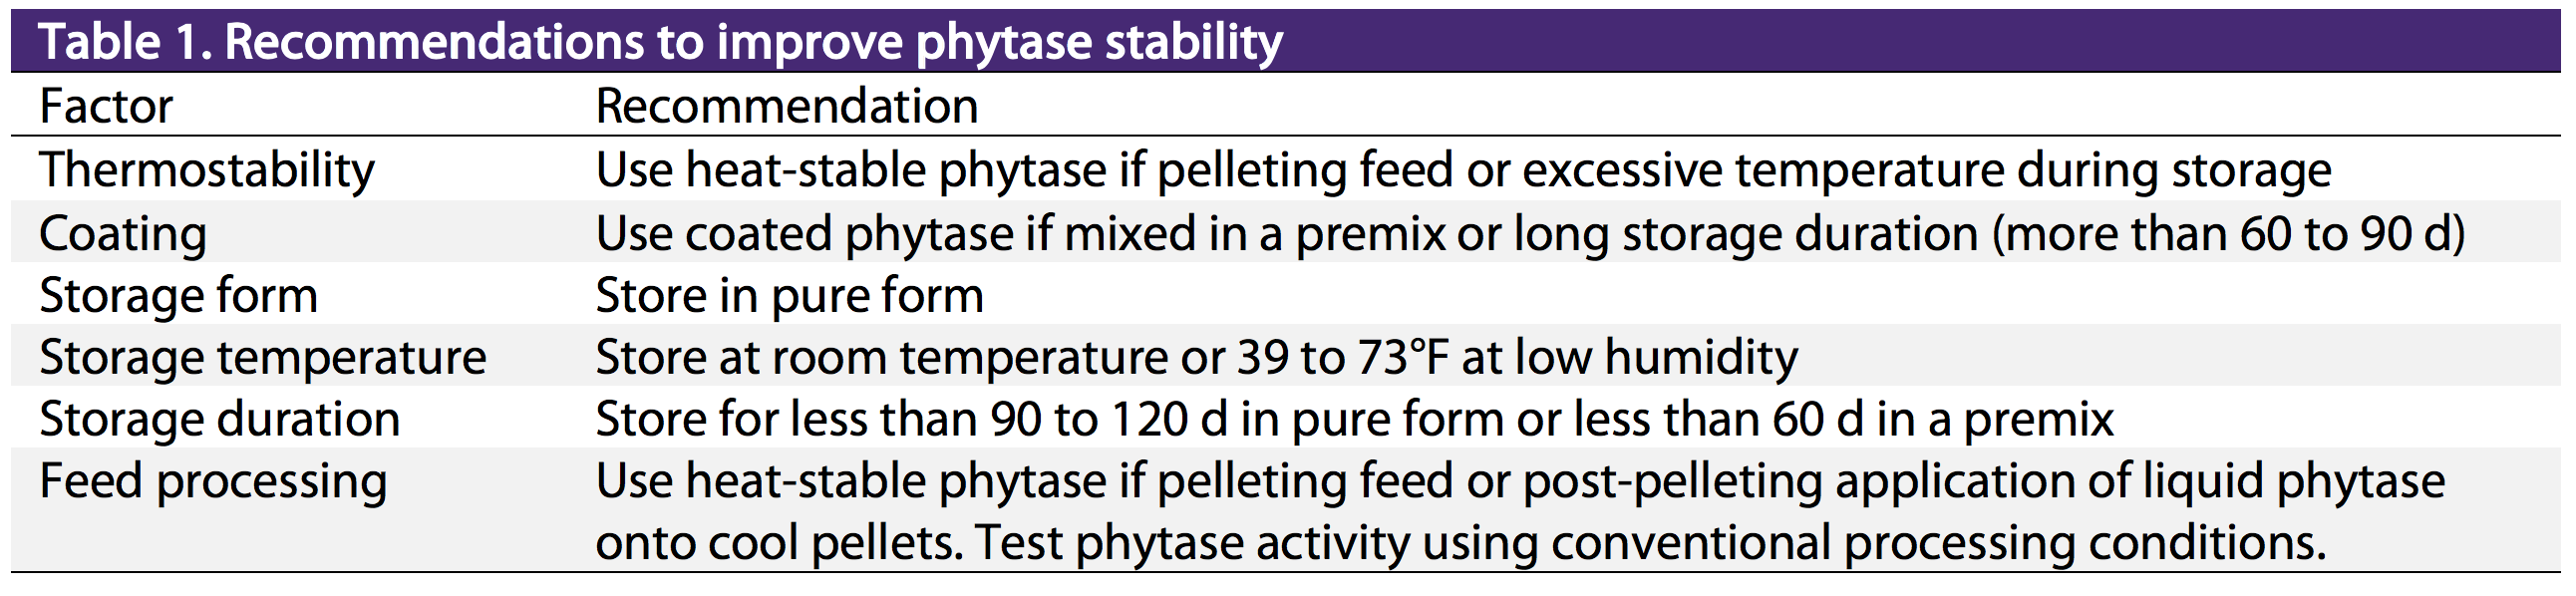 Recommendations to improve phytase stability in swine diets